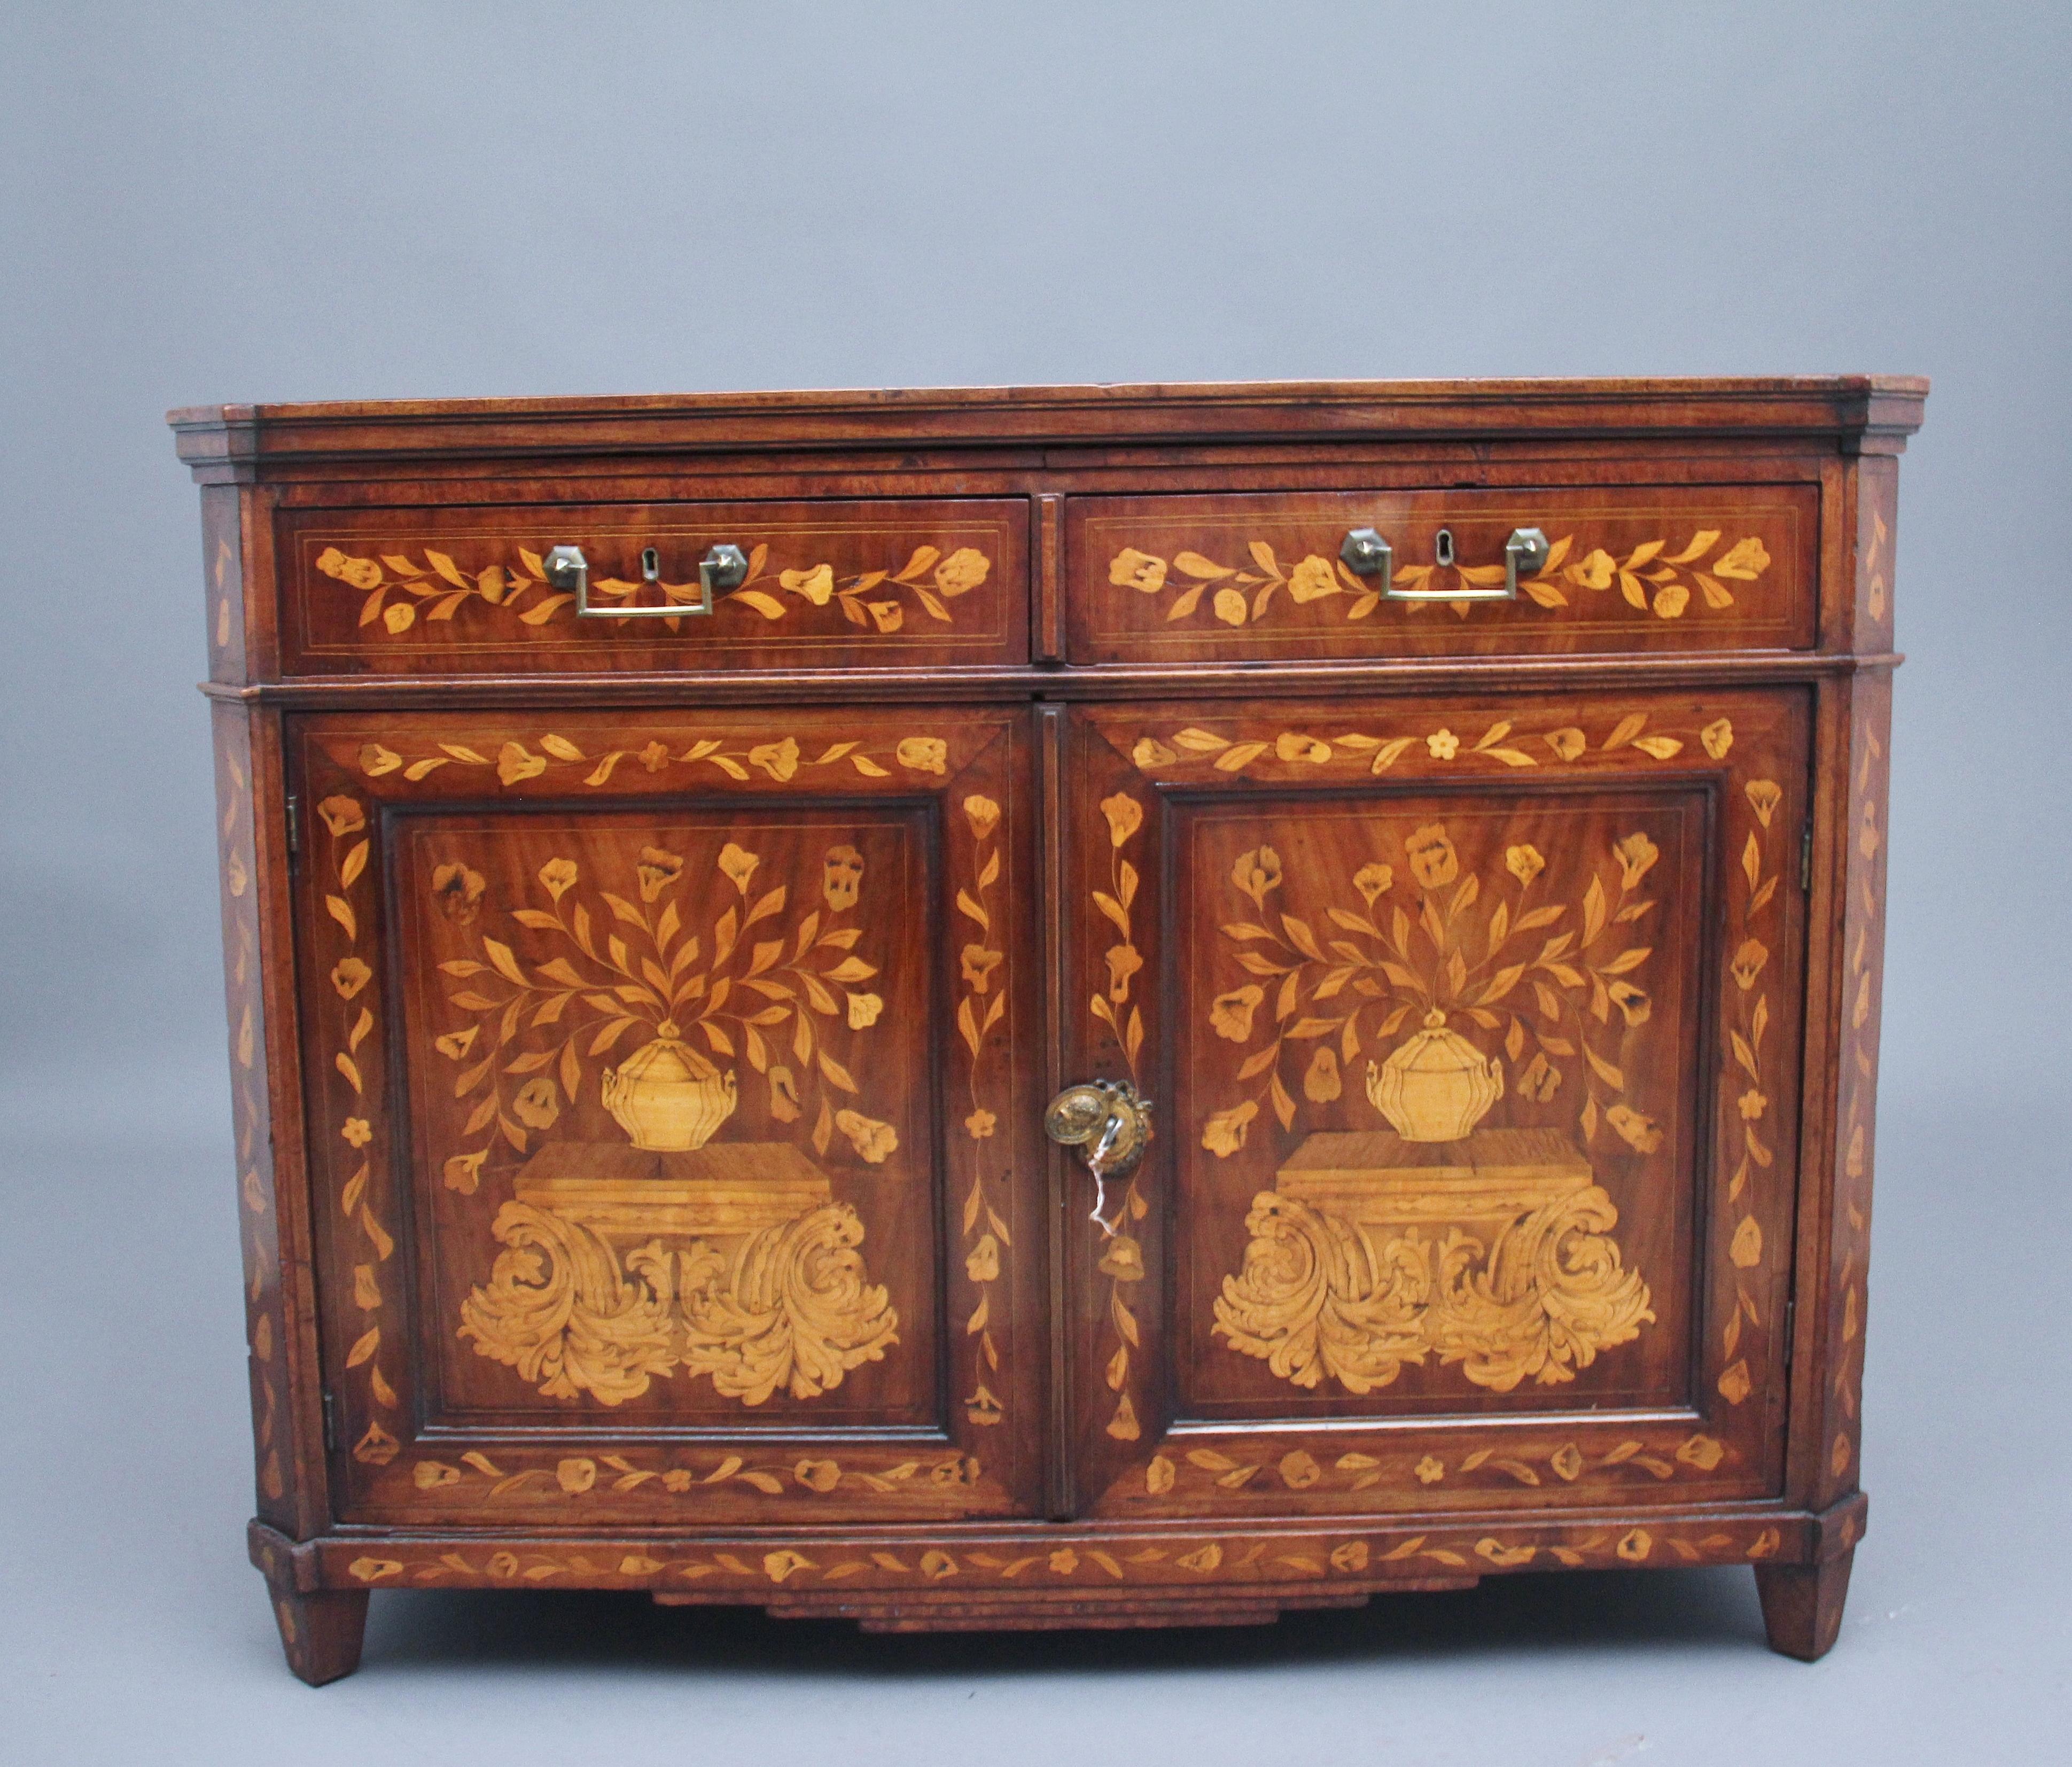 A lovely quality early 19th Century Dutch marquetry travelling cabinet, profusely inlaid all over with various foliage and urns, the decorative top depicting a countryside scene, which lifts up to reveal folding shelves and back panel, the faux